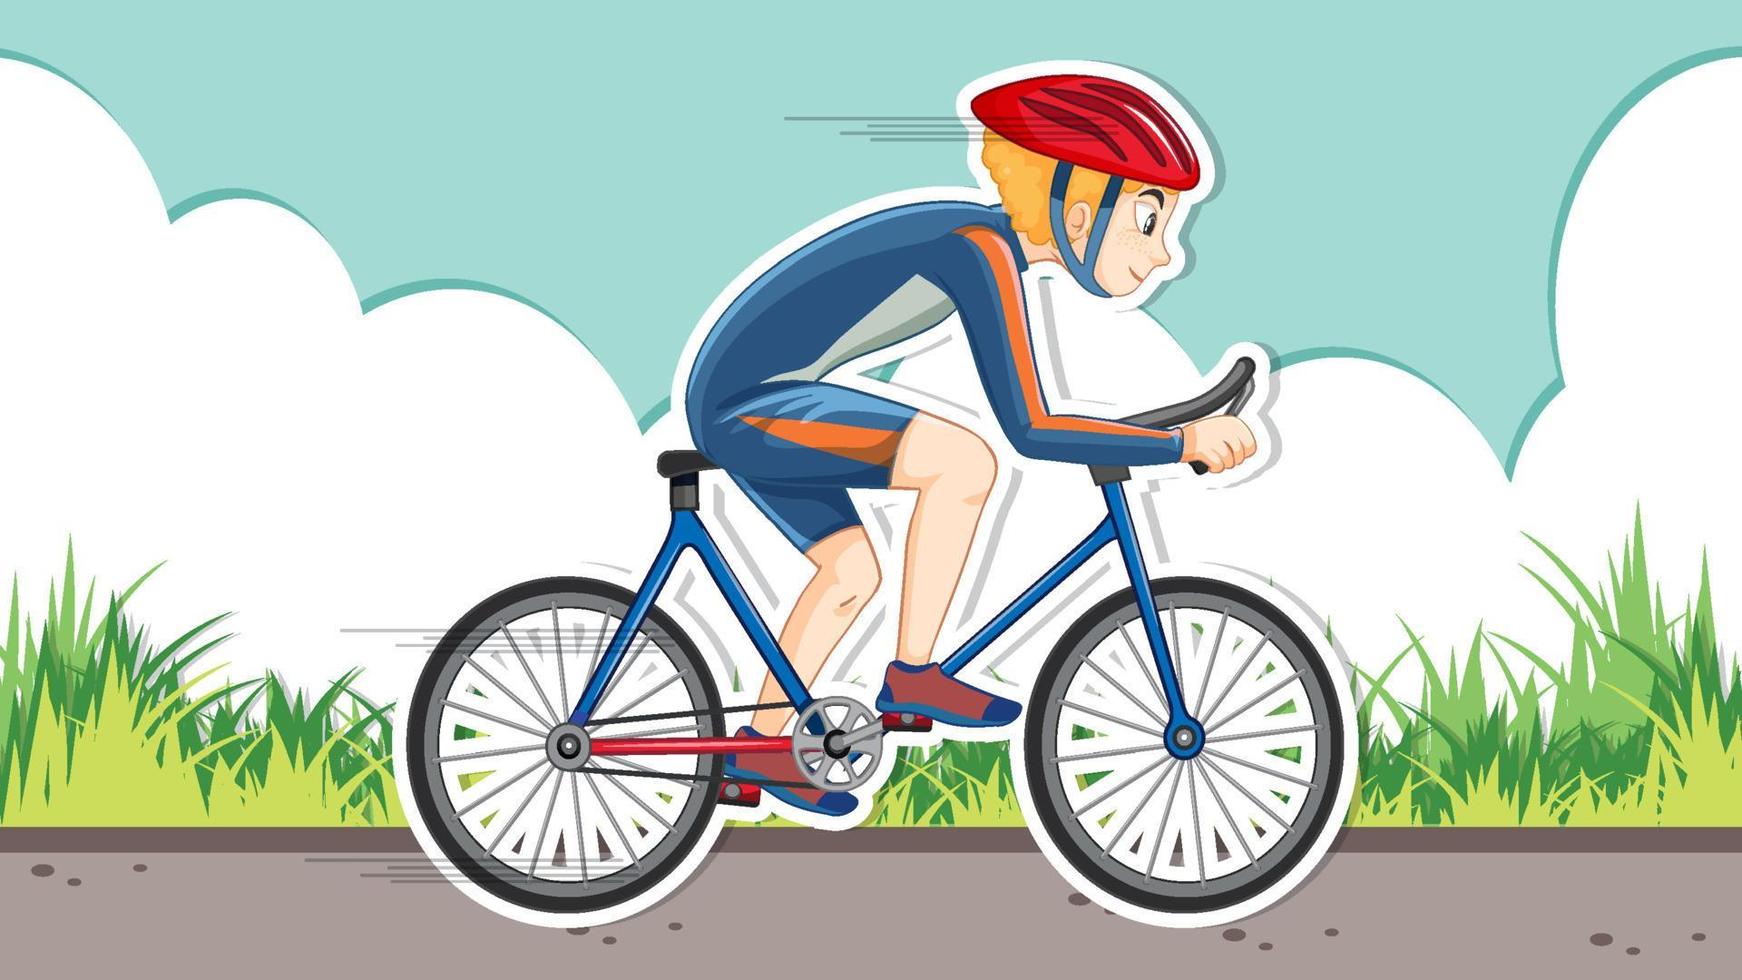 Thumbnail design with Cyclist riding a bicycle vector